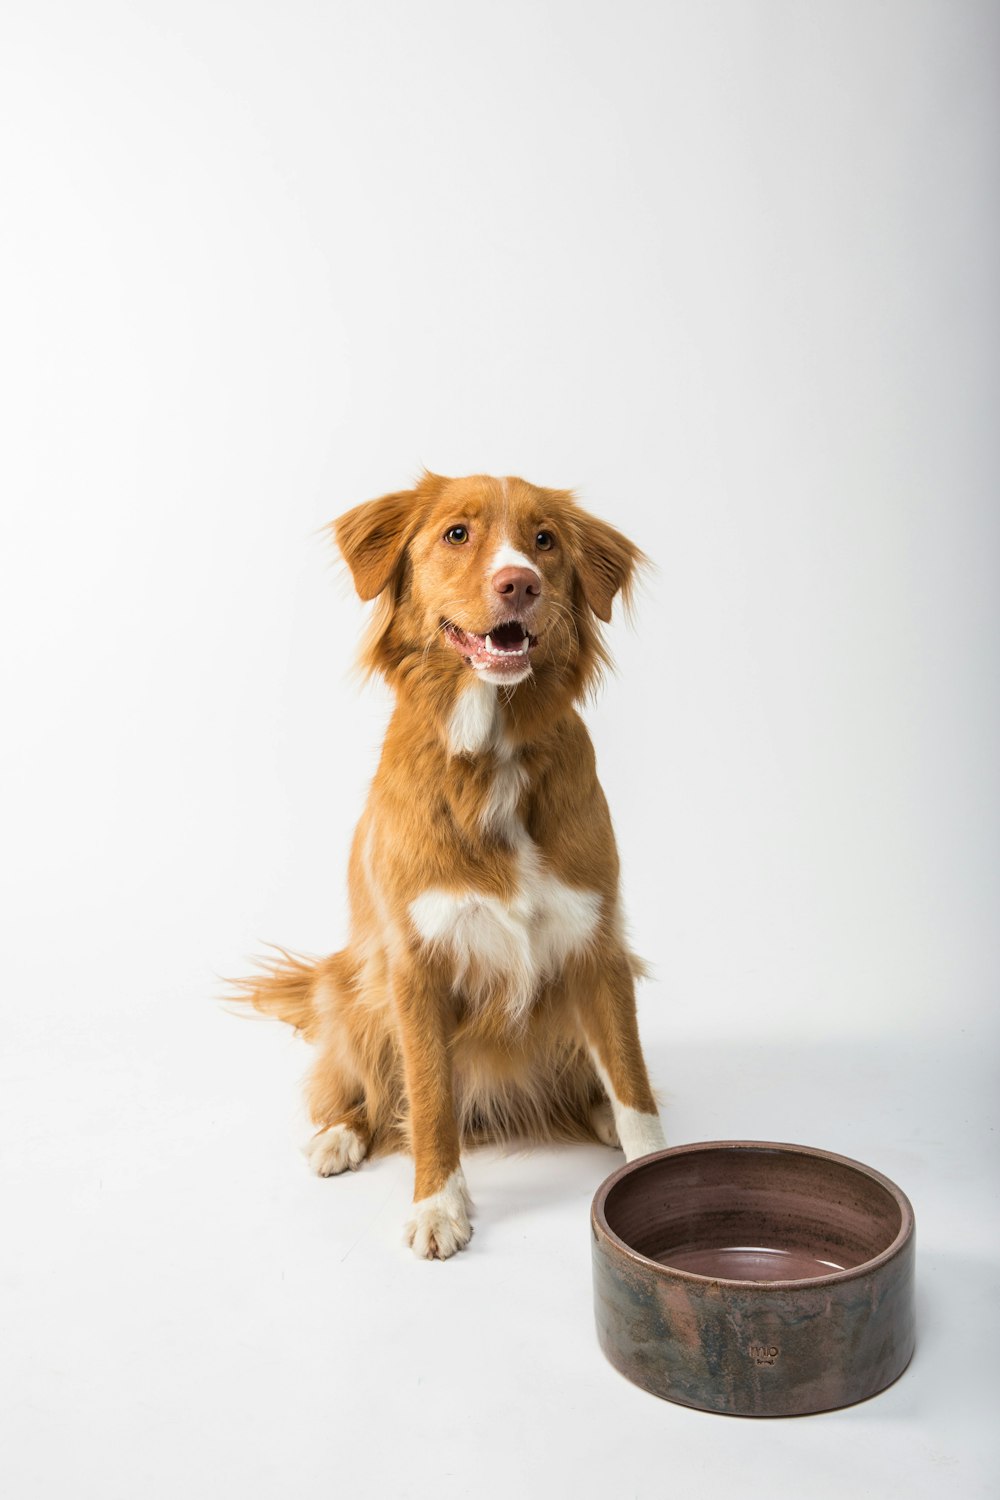 brown and white long coated dog sitting on brown wooden round table